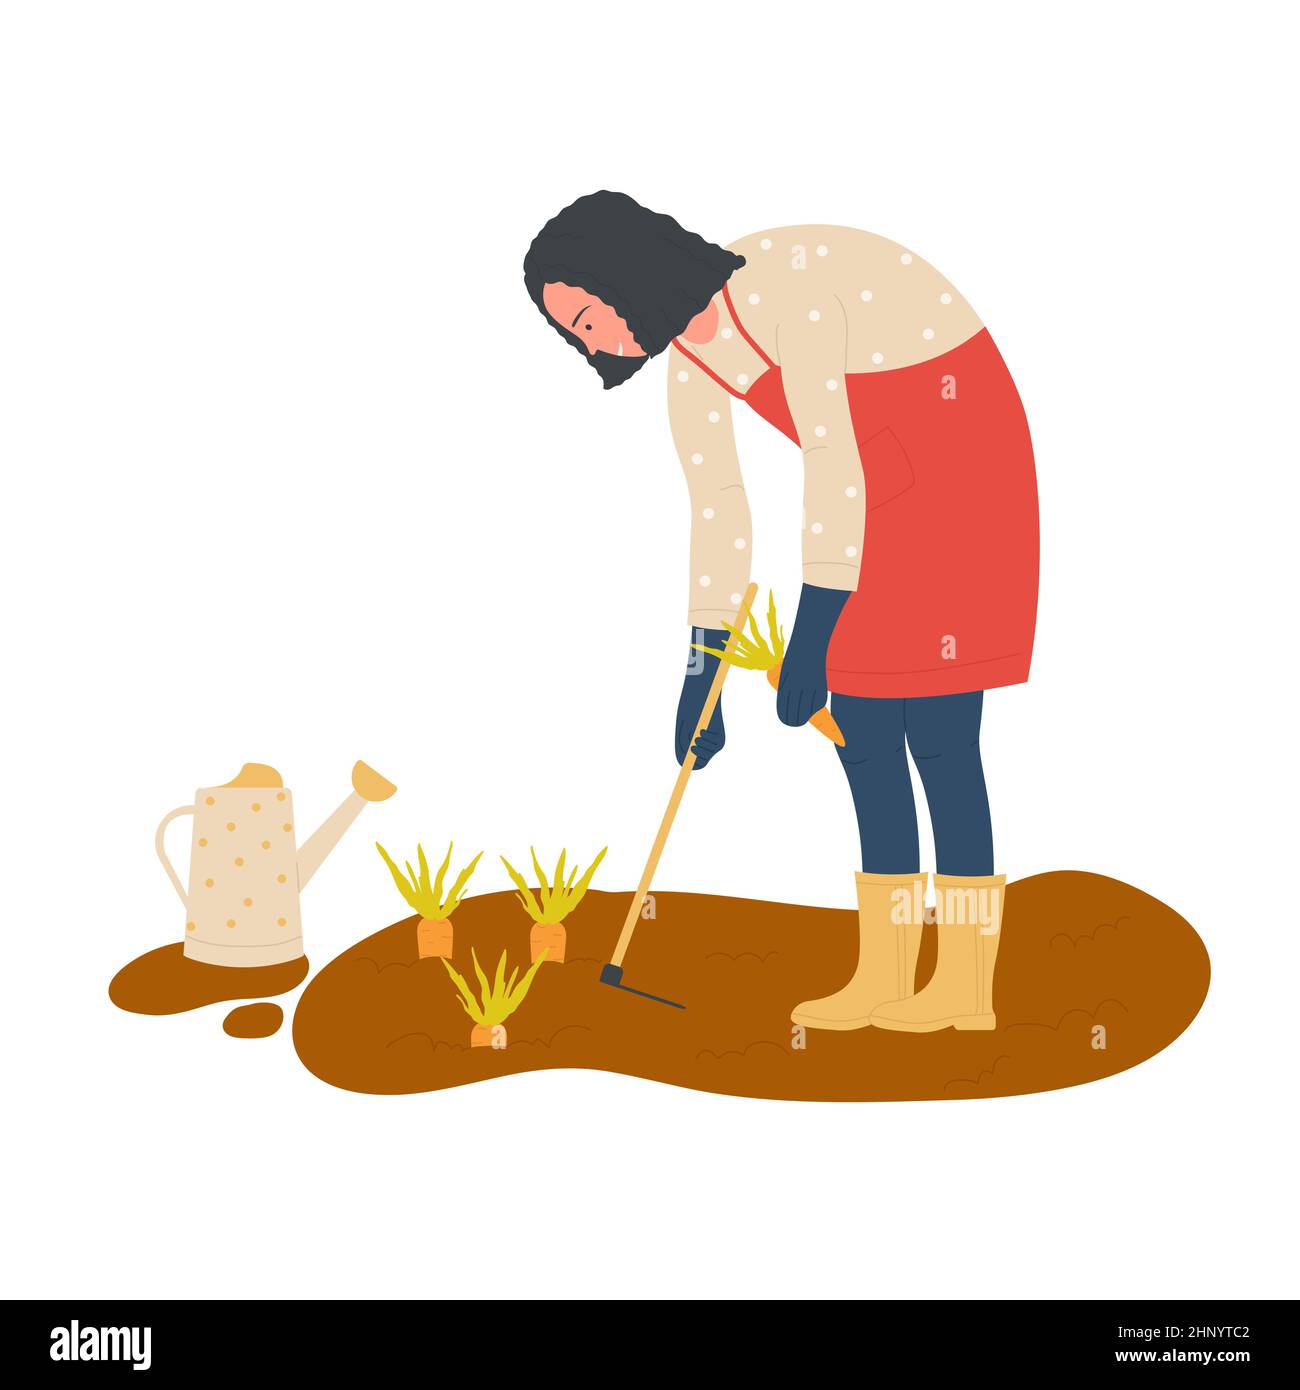 Farmer girl harvesting carrots with agricultural tool. Cultivation and growing ecological food cartoon vector illustration Stock Vector